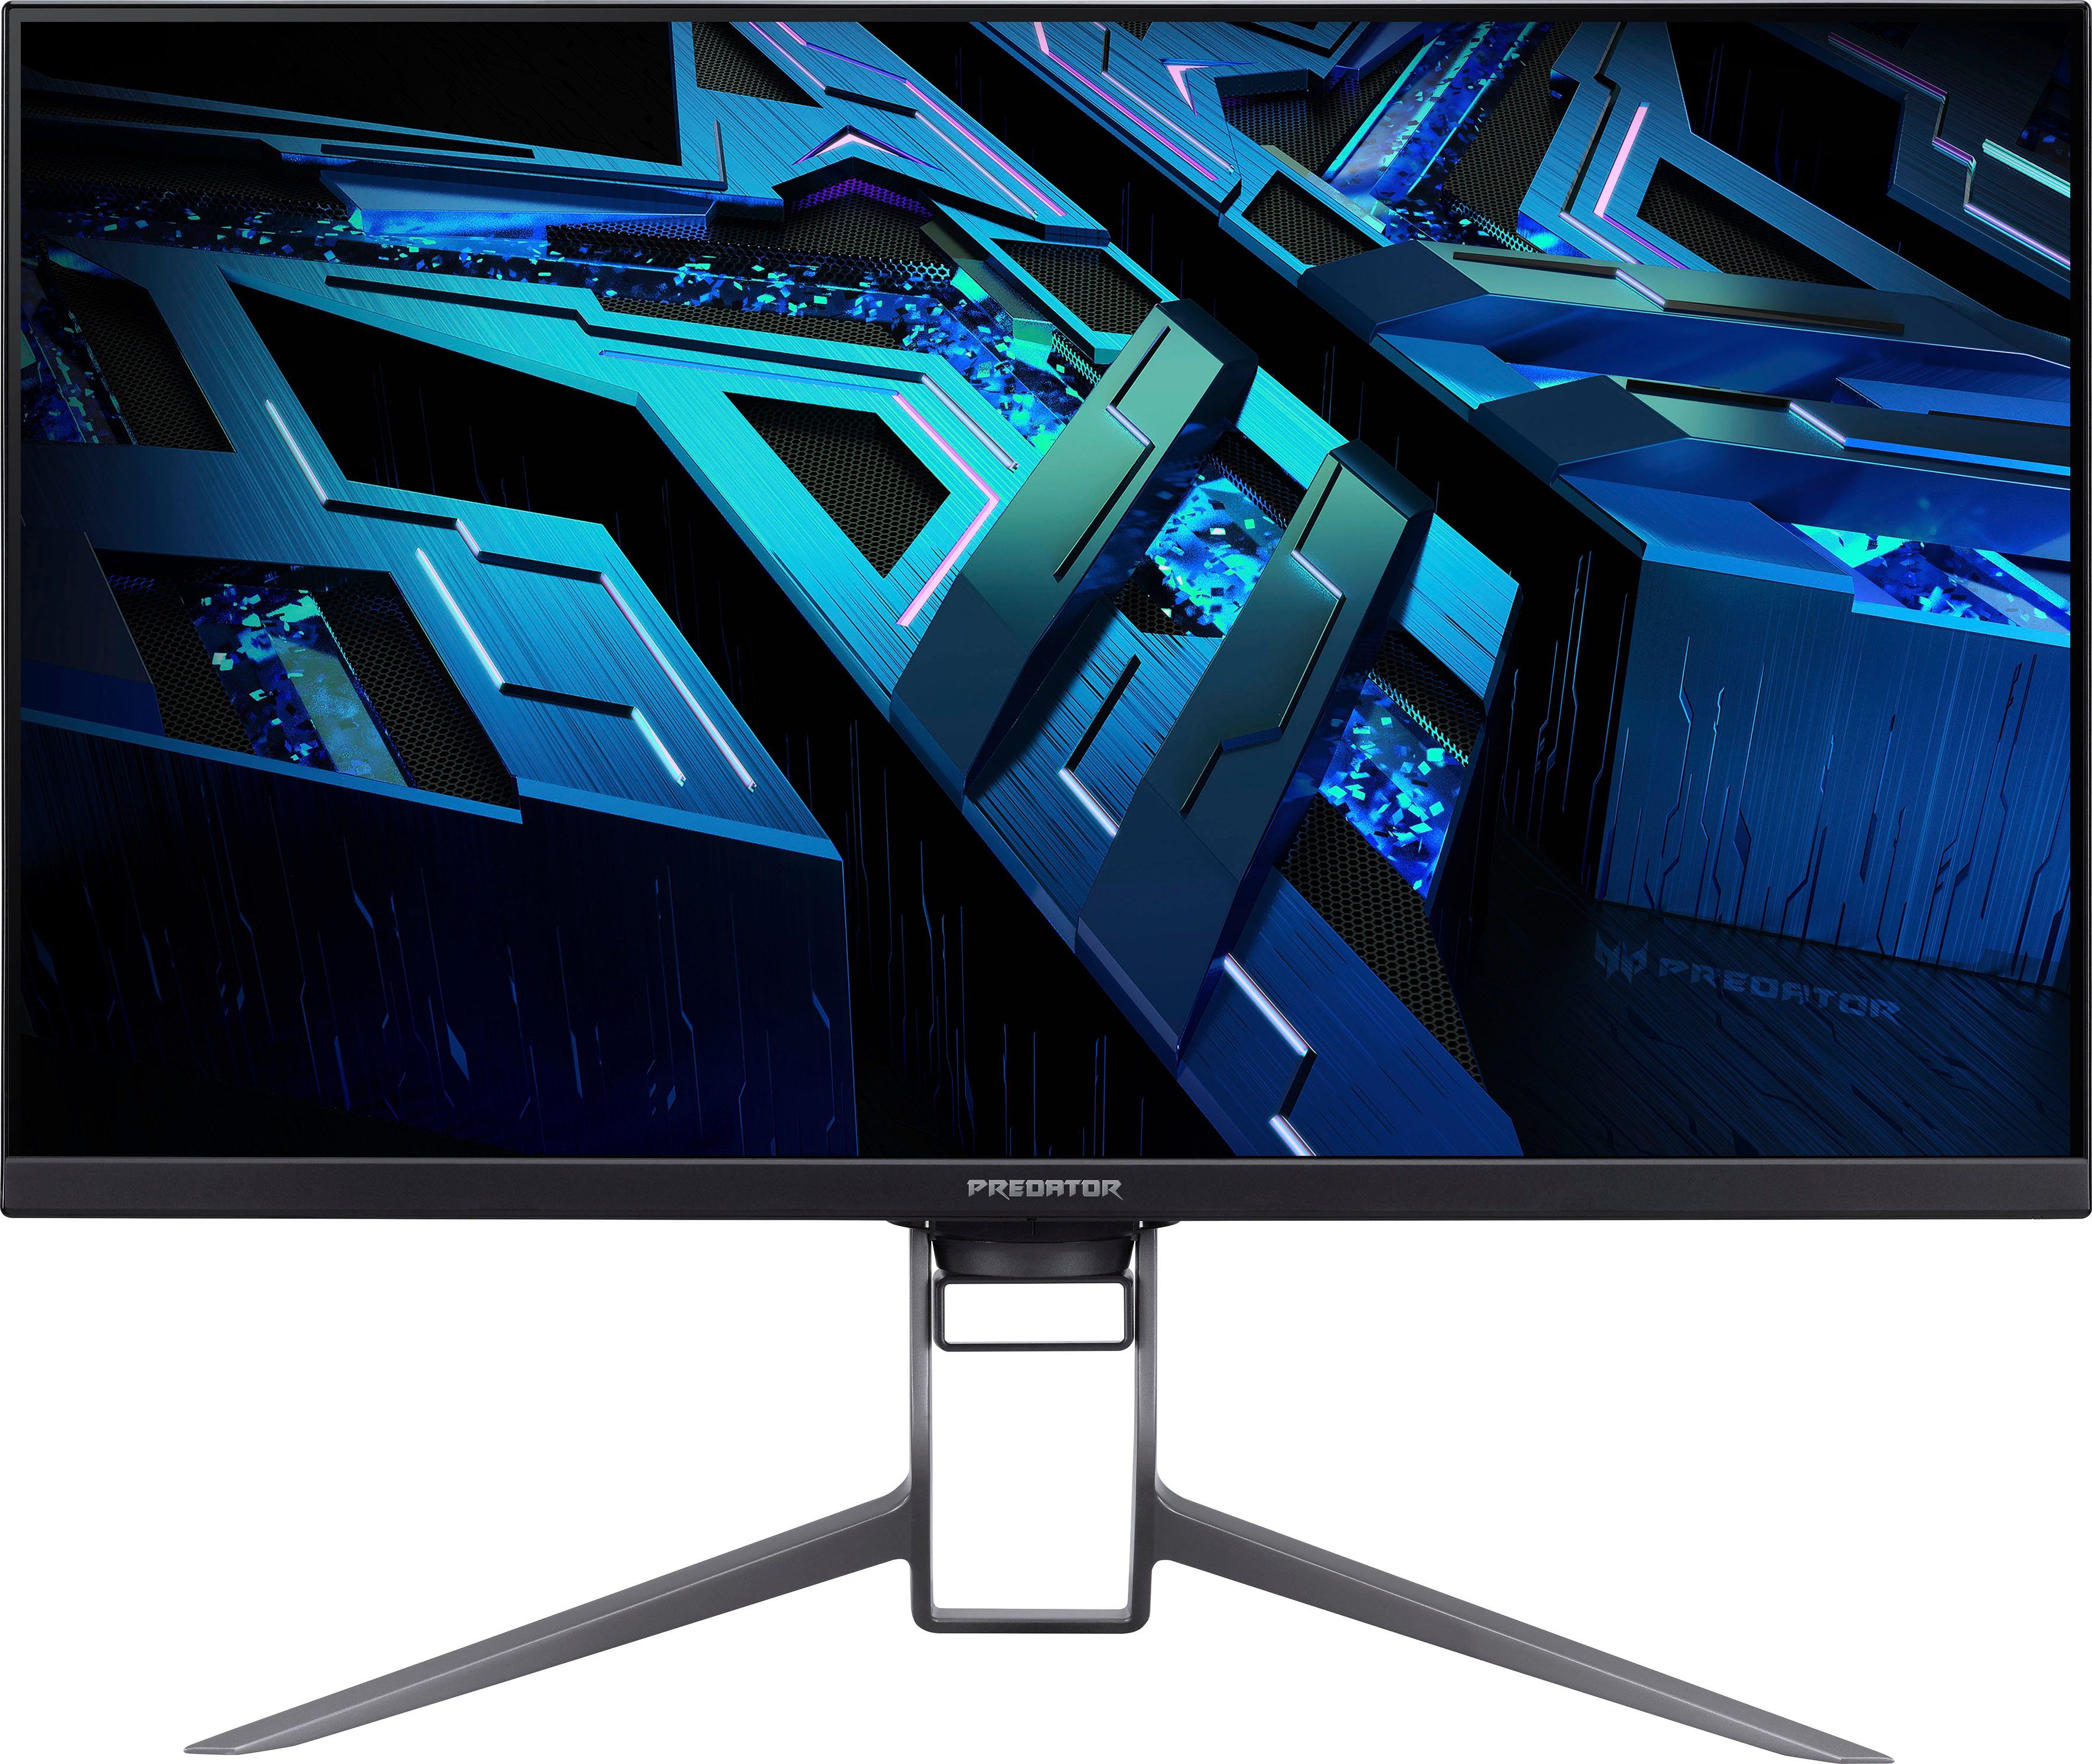 Acer Predator X32 FP Reaktionszeit, Gaming-LED-Monitor Quantum 4K Dot HD, cm/32 0,7 HDR LCD, ms miniLED 3840 Hz, Panel, 1000) Ultra px, 160 2160 (81 x "